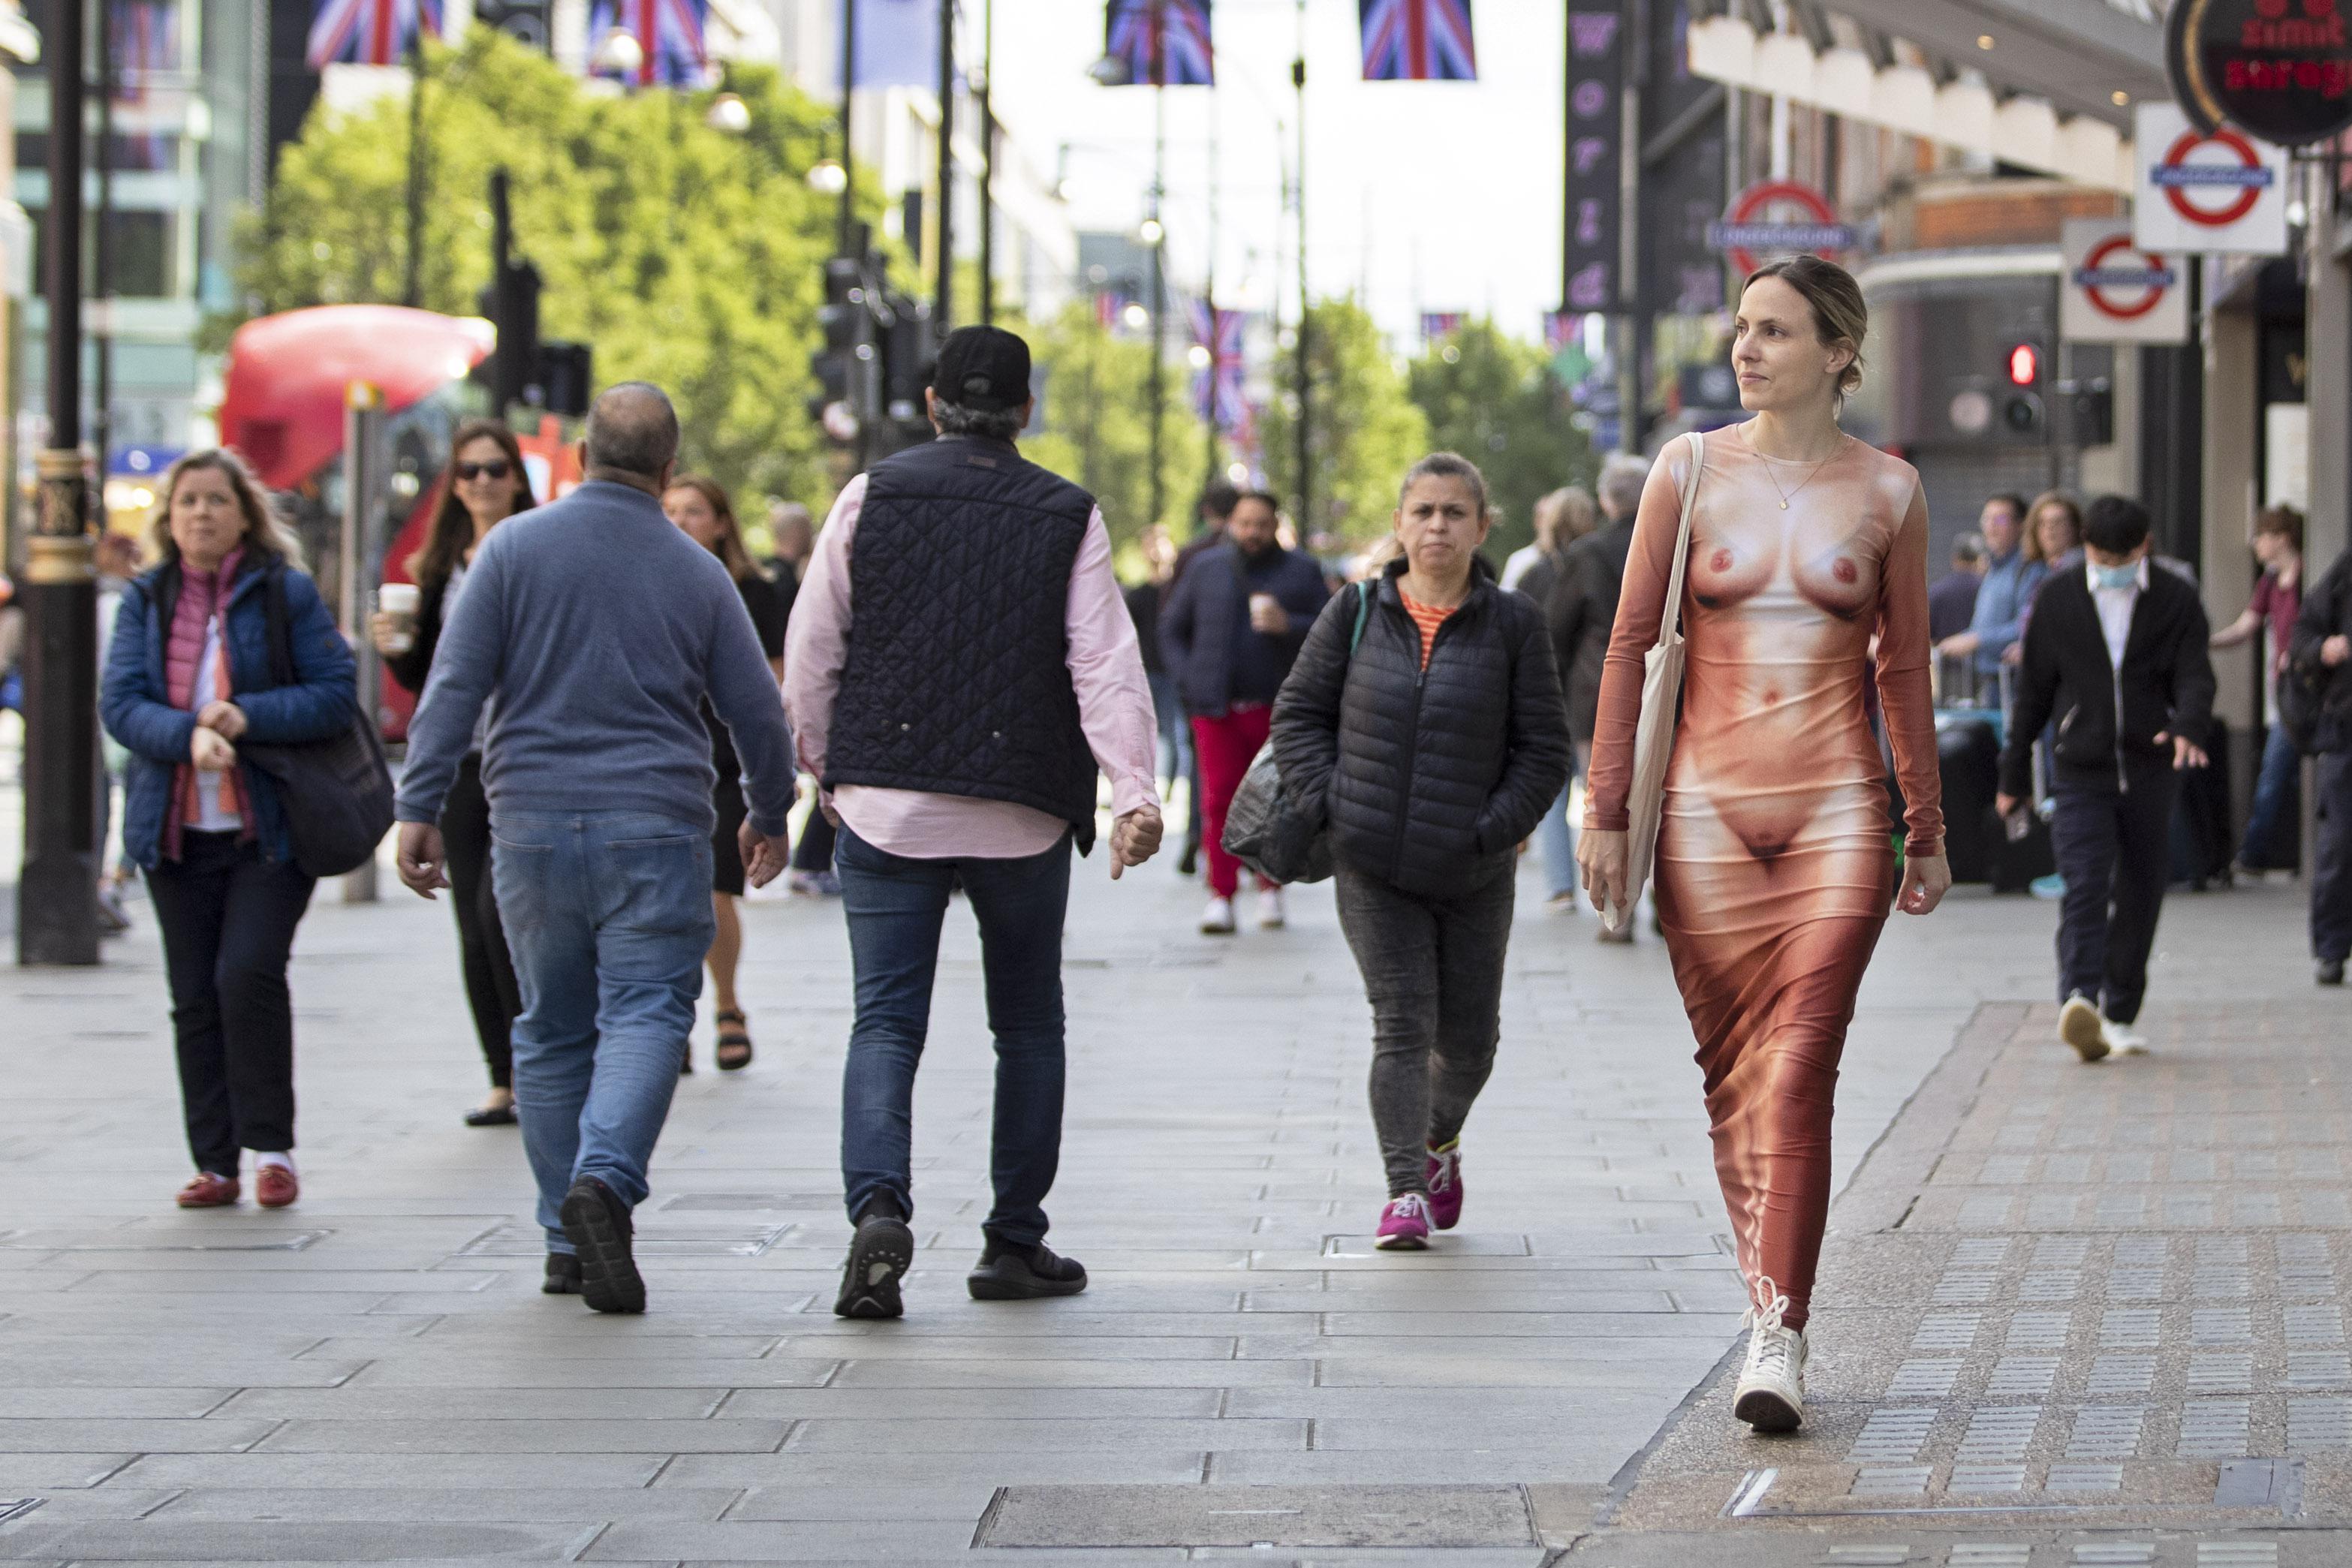 don heskett recommends Walk Naked In Britain Day